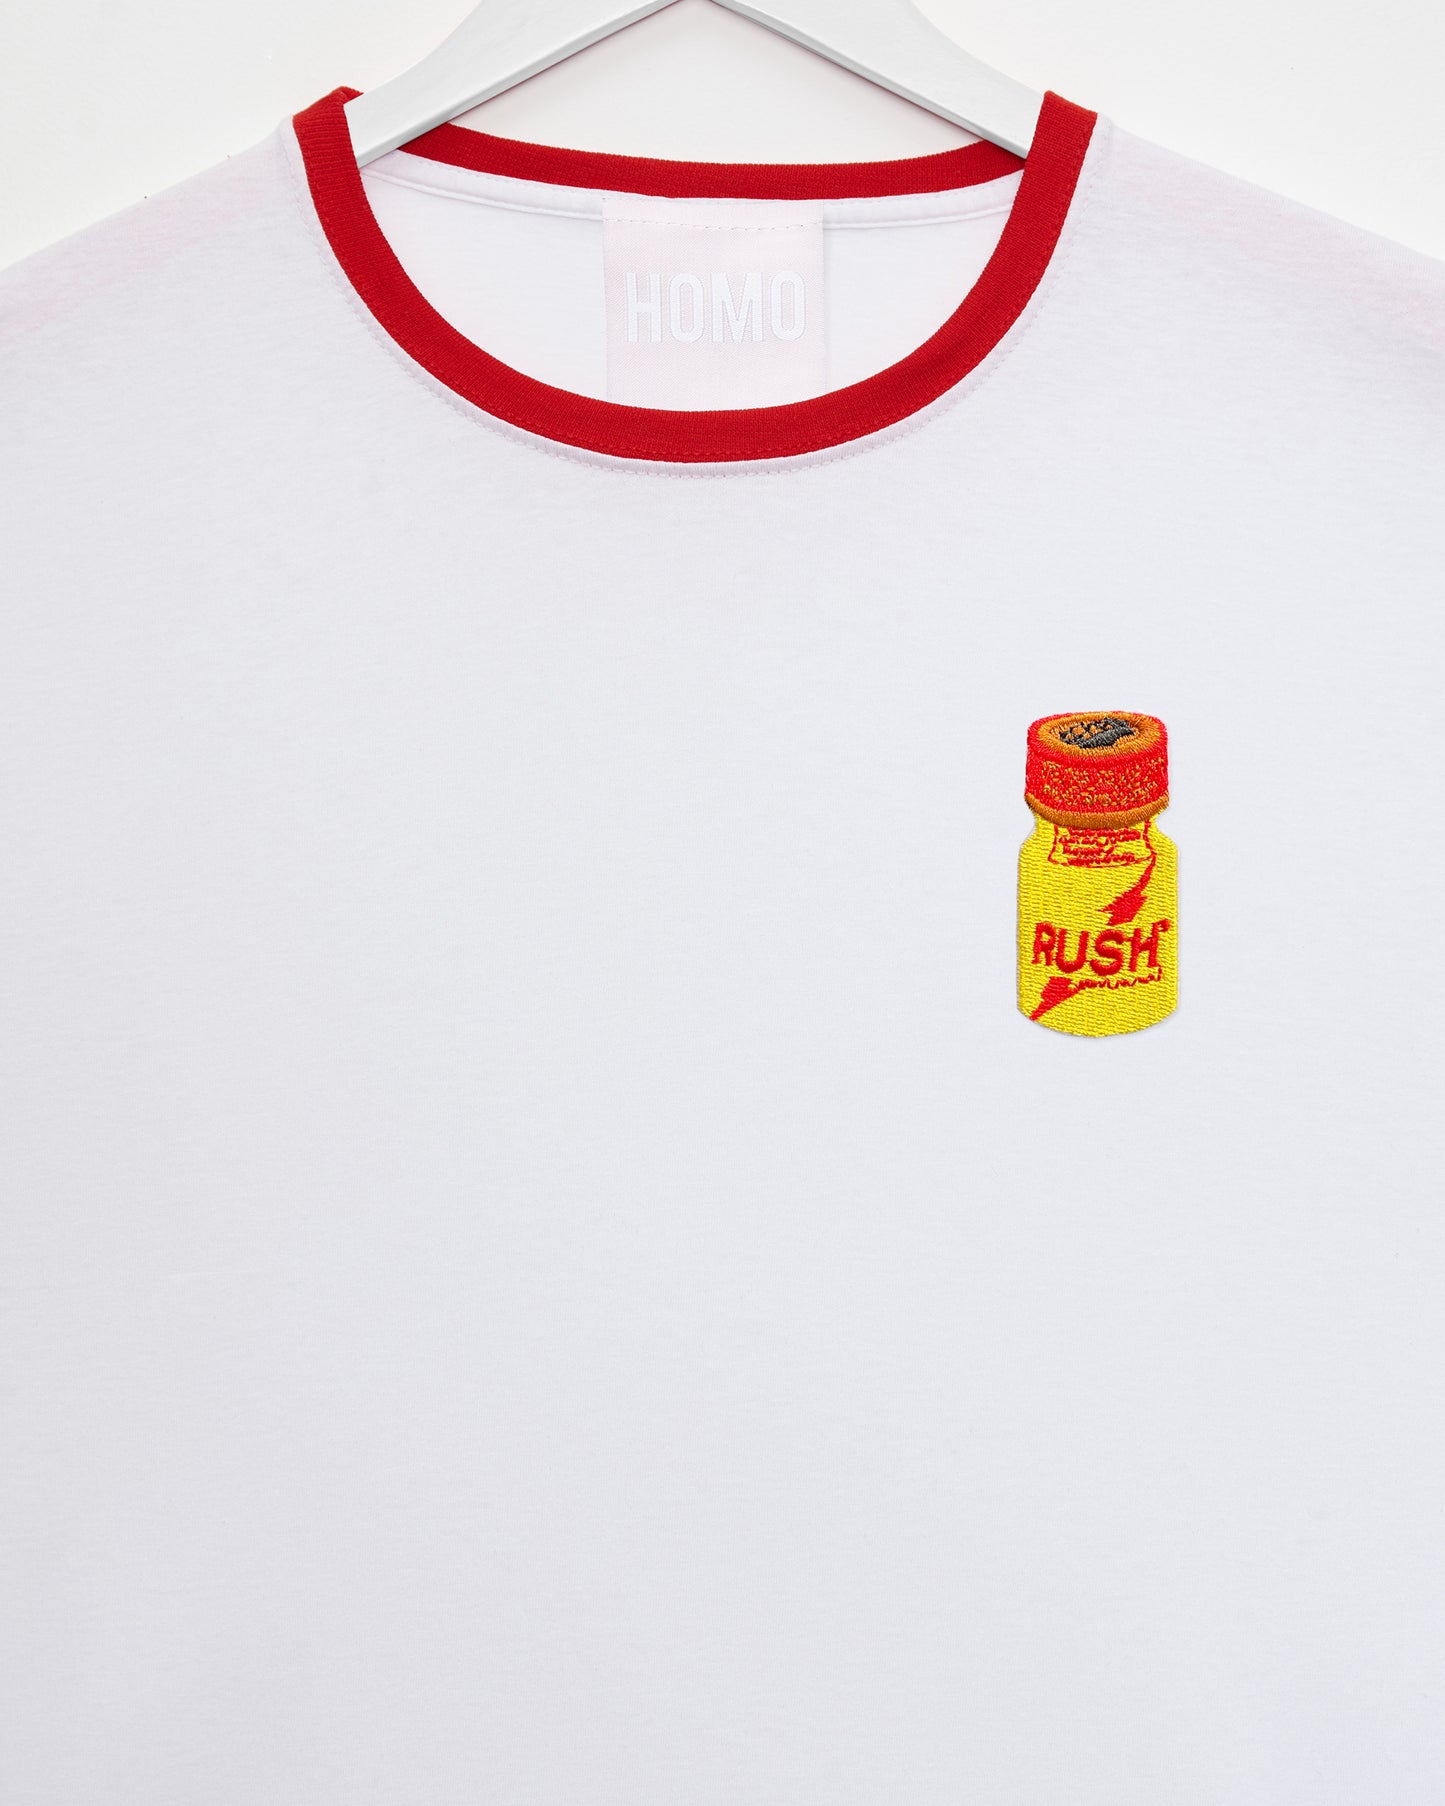 Po*pers Embroidery - Red Trim - SLIM FIT Tee.